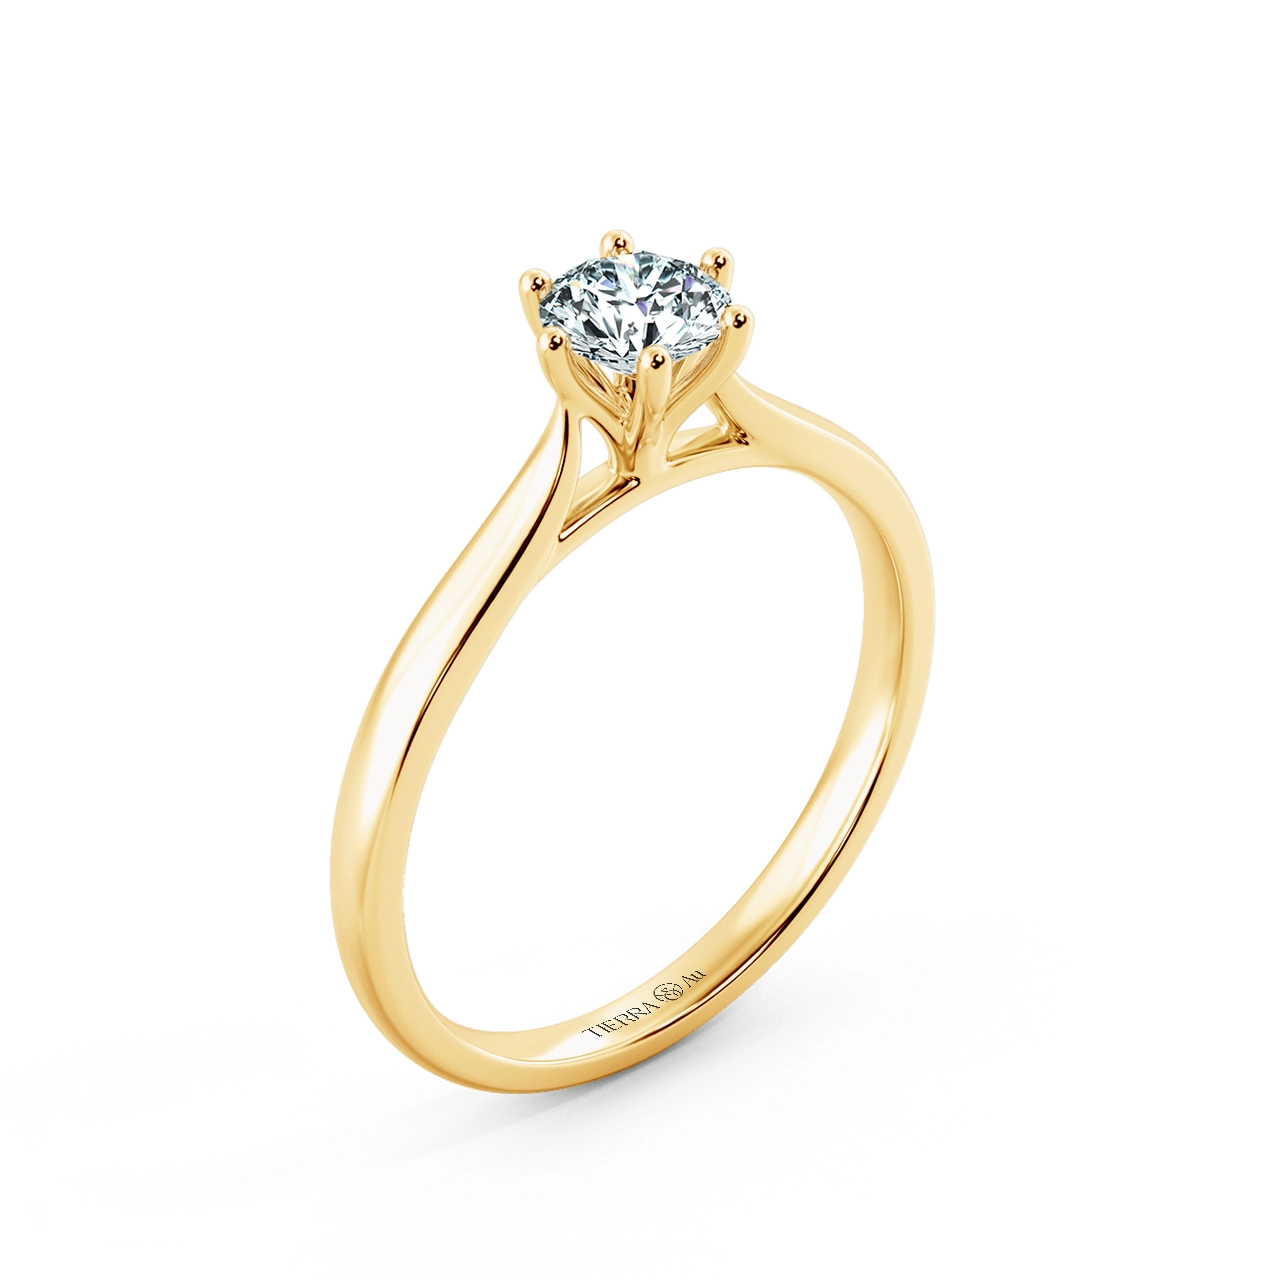 Basic Shiny Cathedral Engagement Ring with Six Prong Setting NCH1503 4